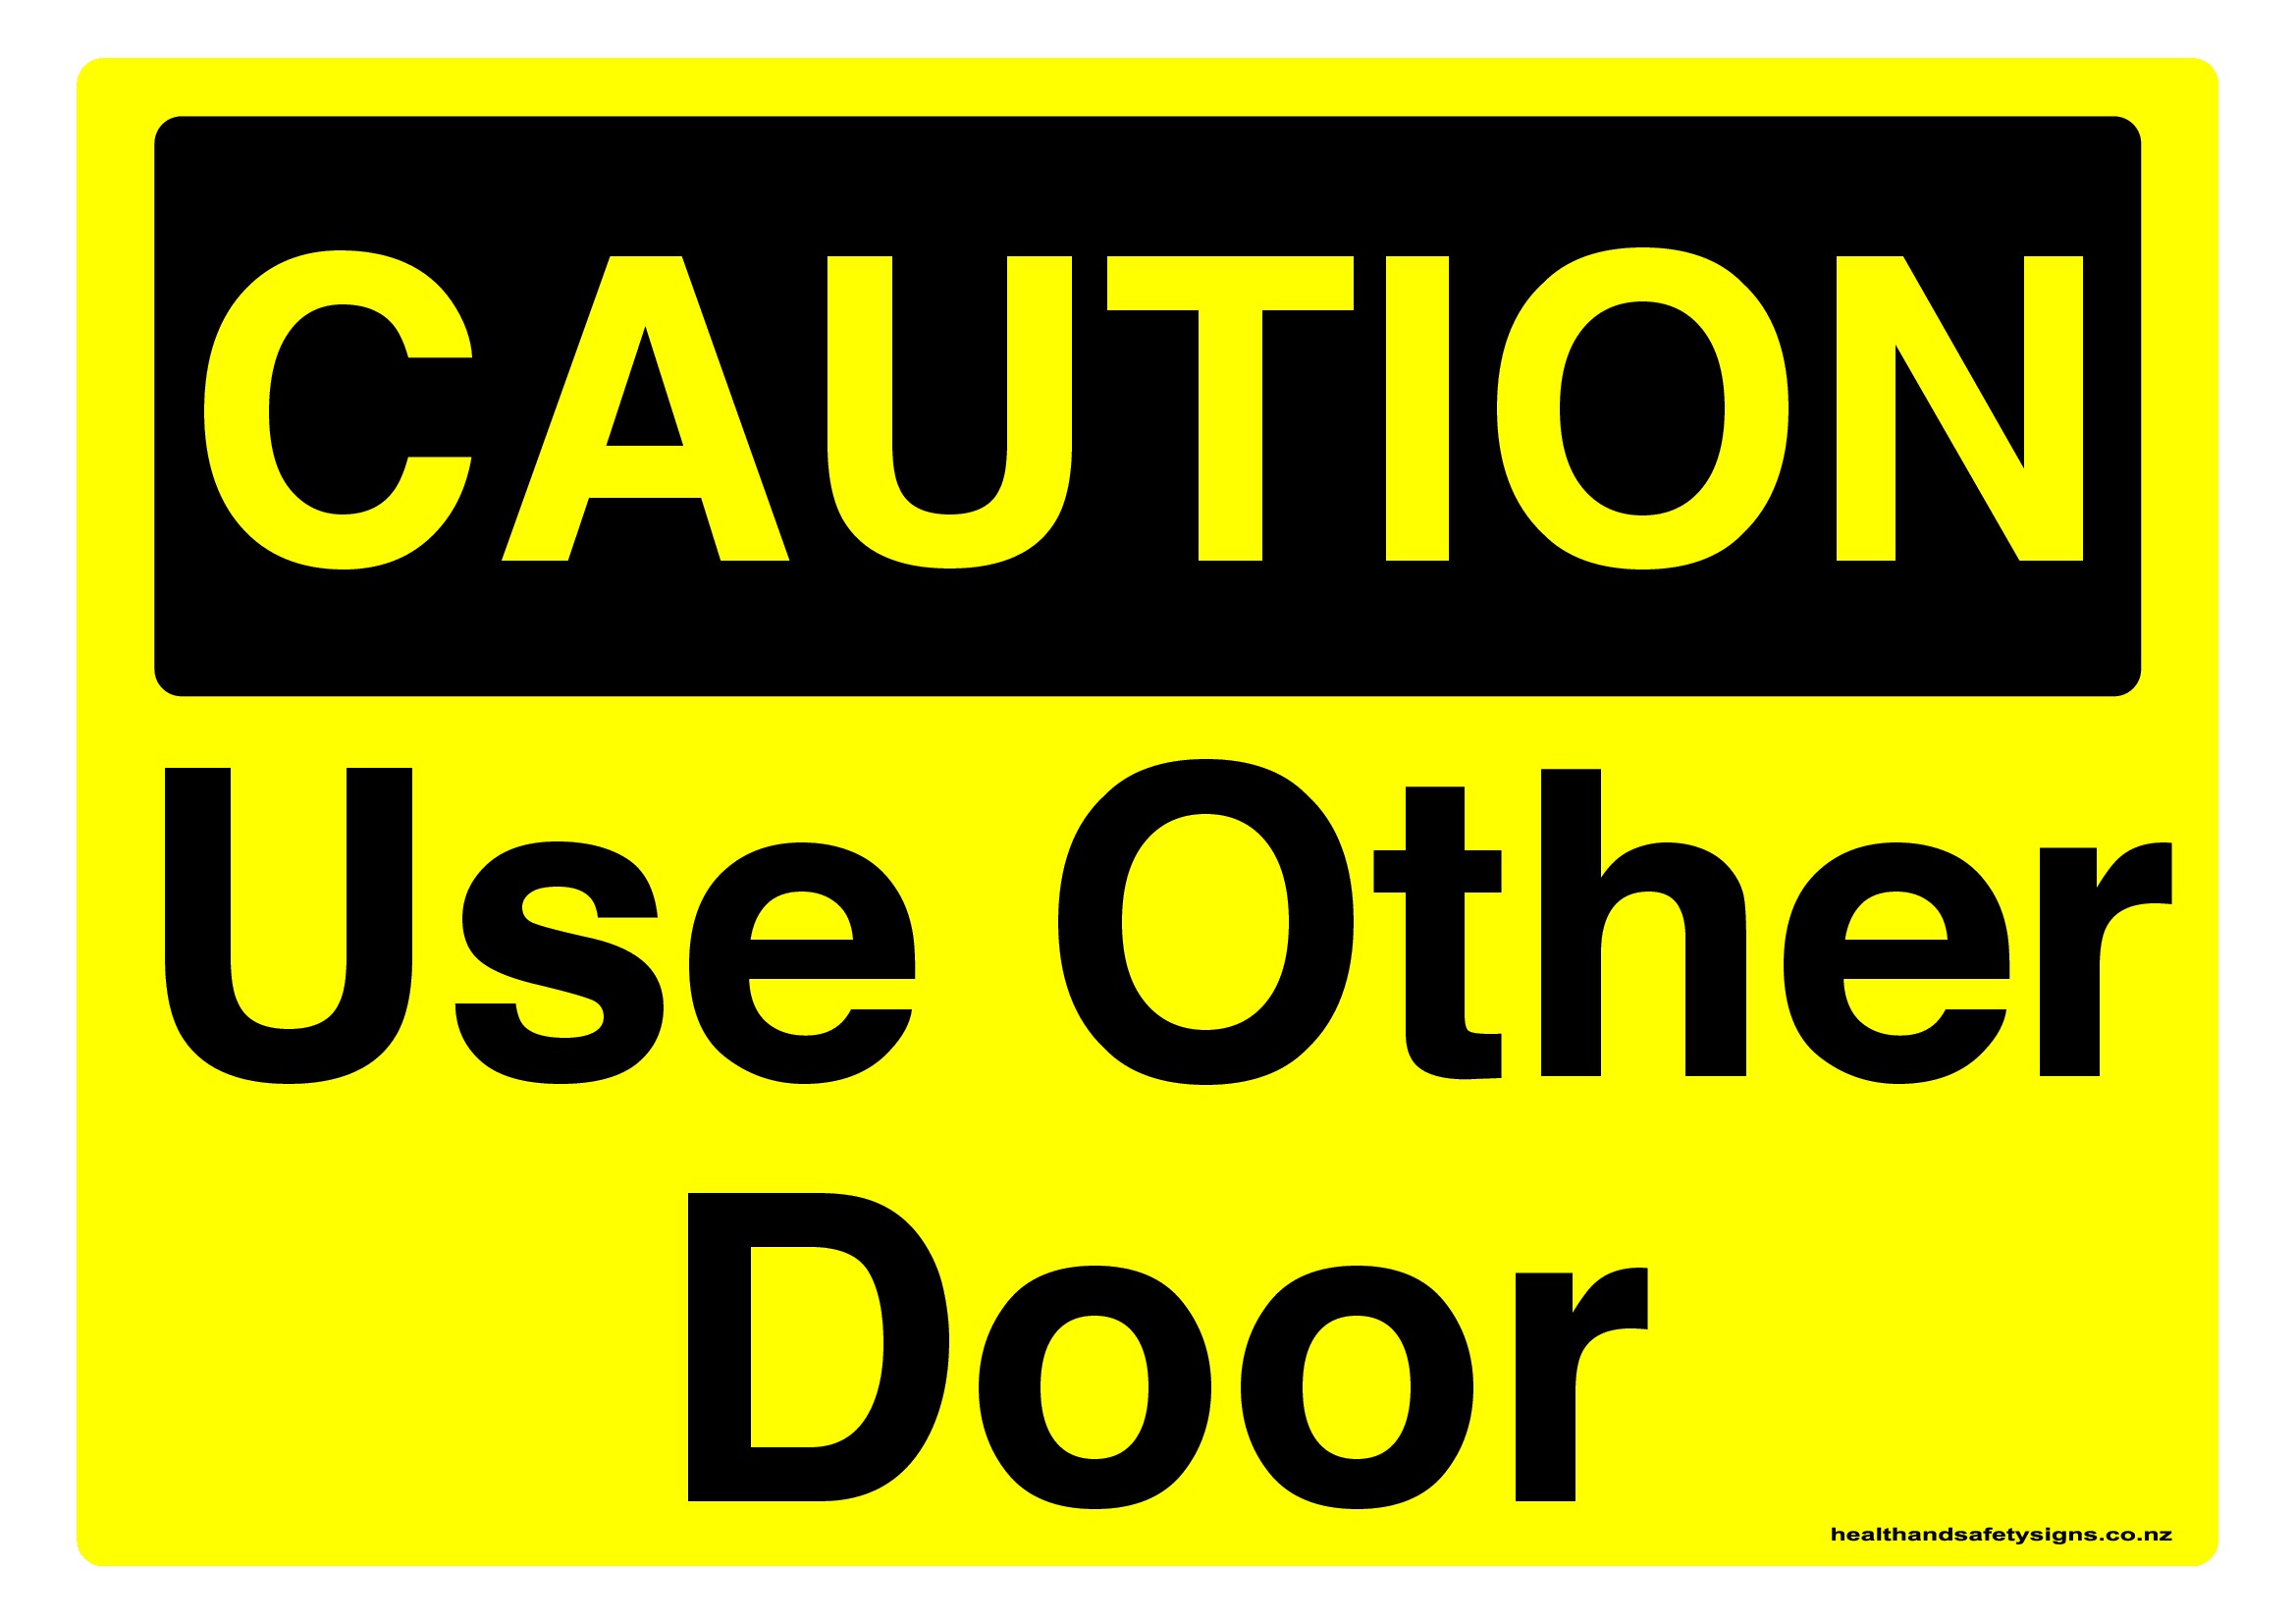 Use other door caution sign.